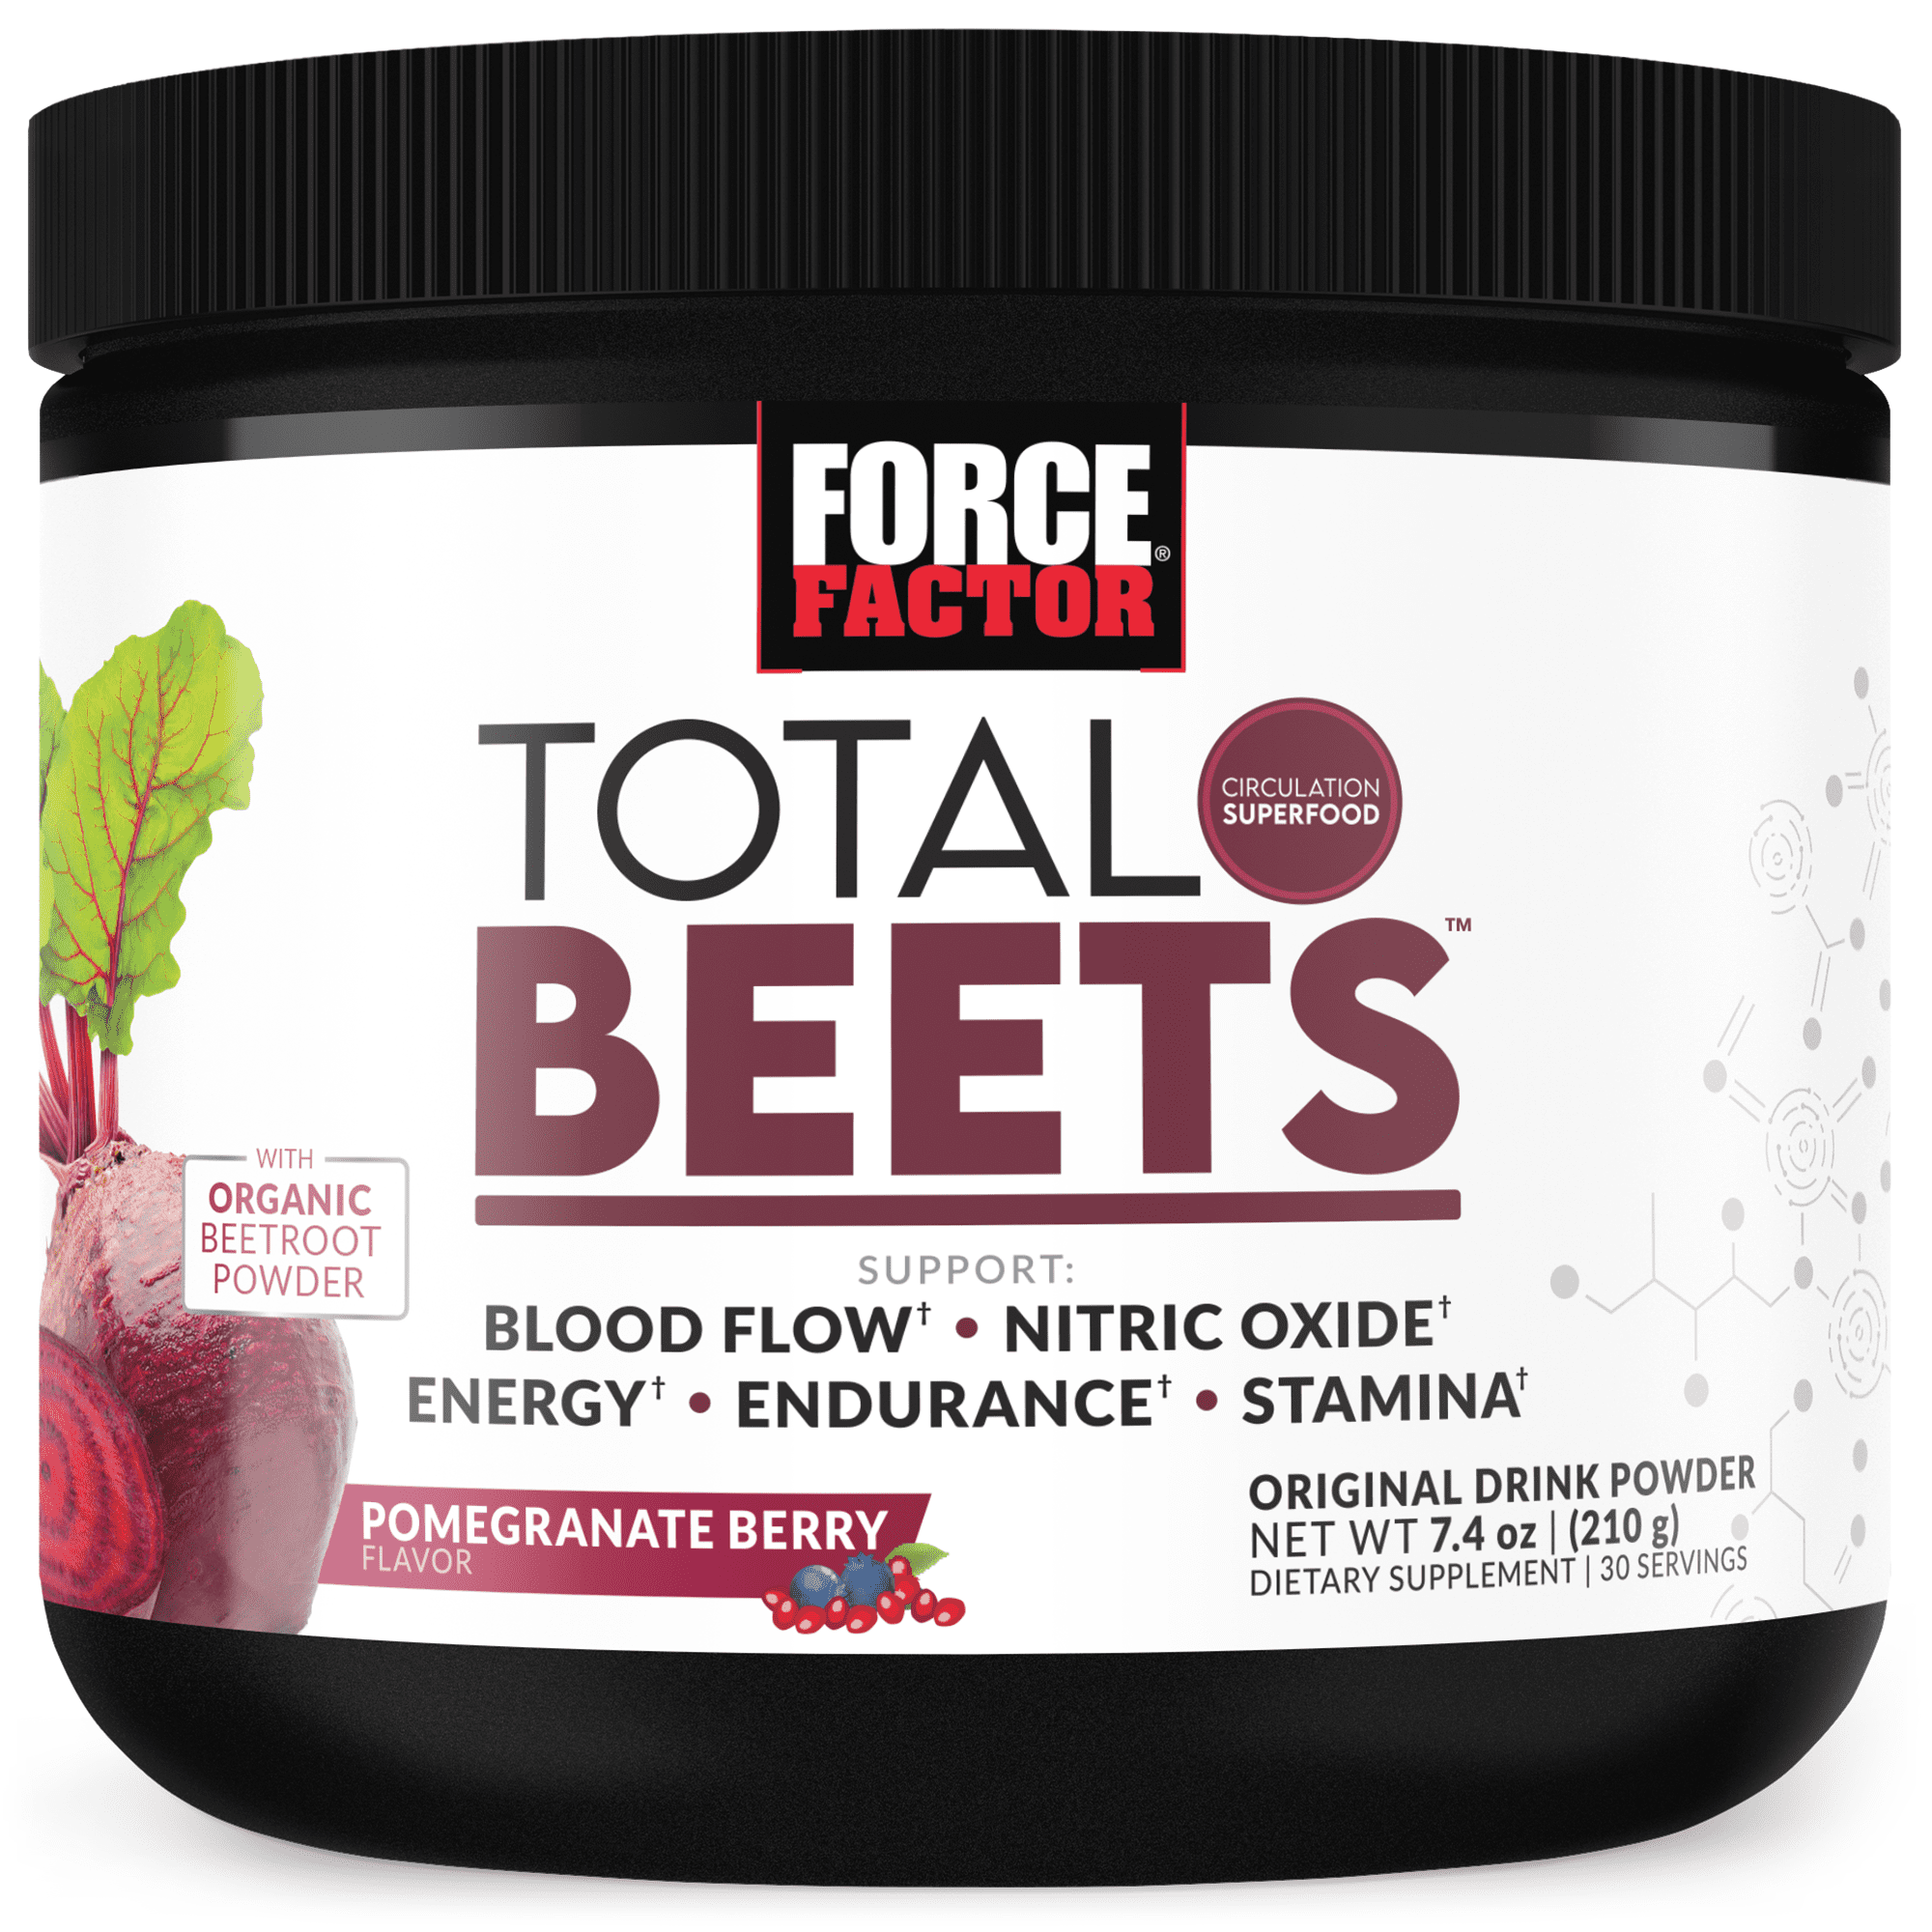 Force Factor Total Beets, Beetroot Powder Supplement with Betaine Nitrate, 30 Servings